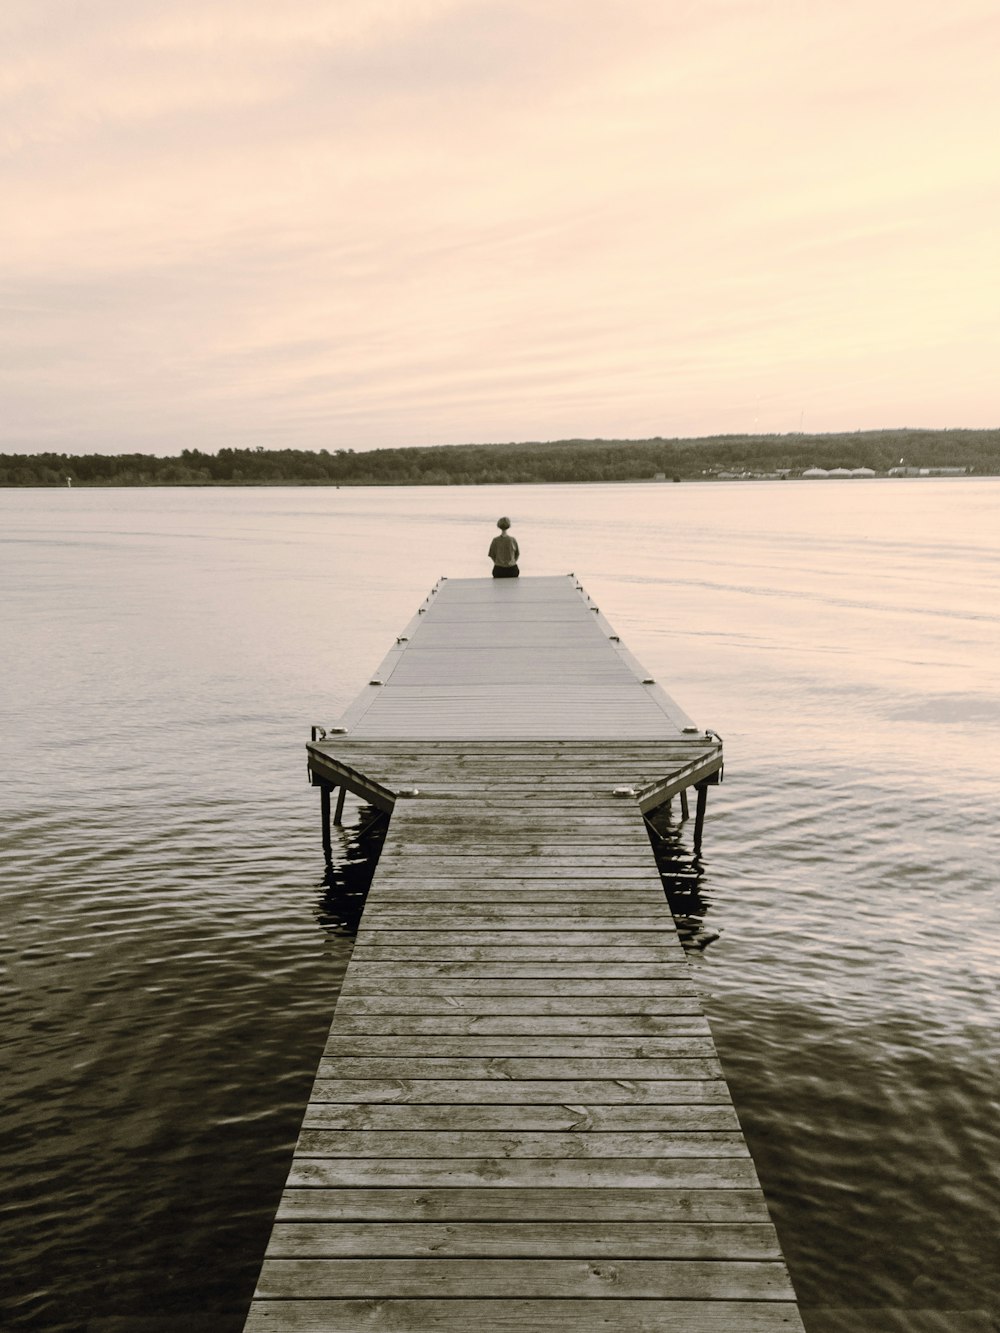 a long dock extending into a body of water